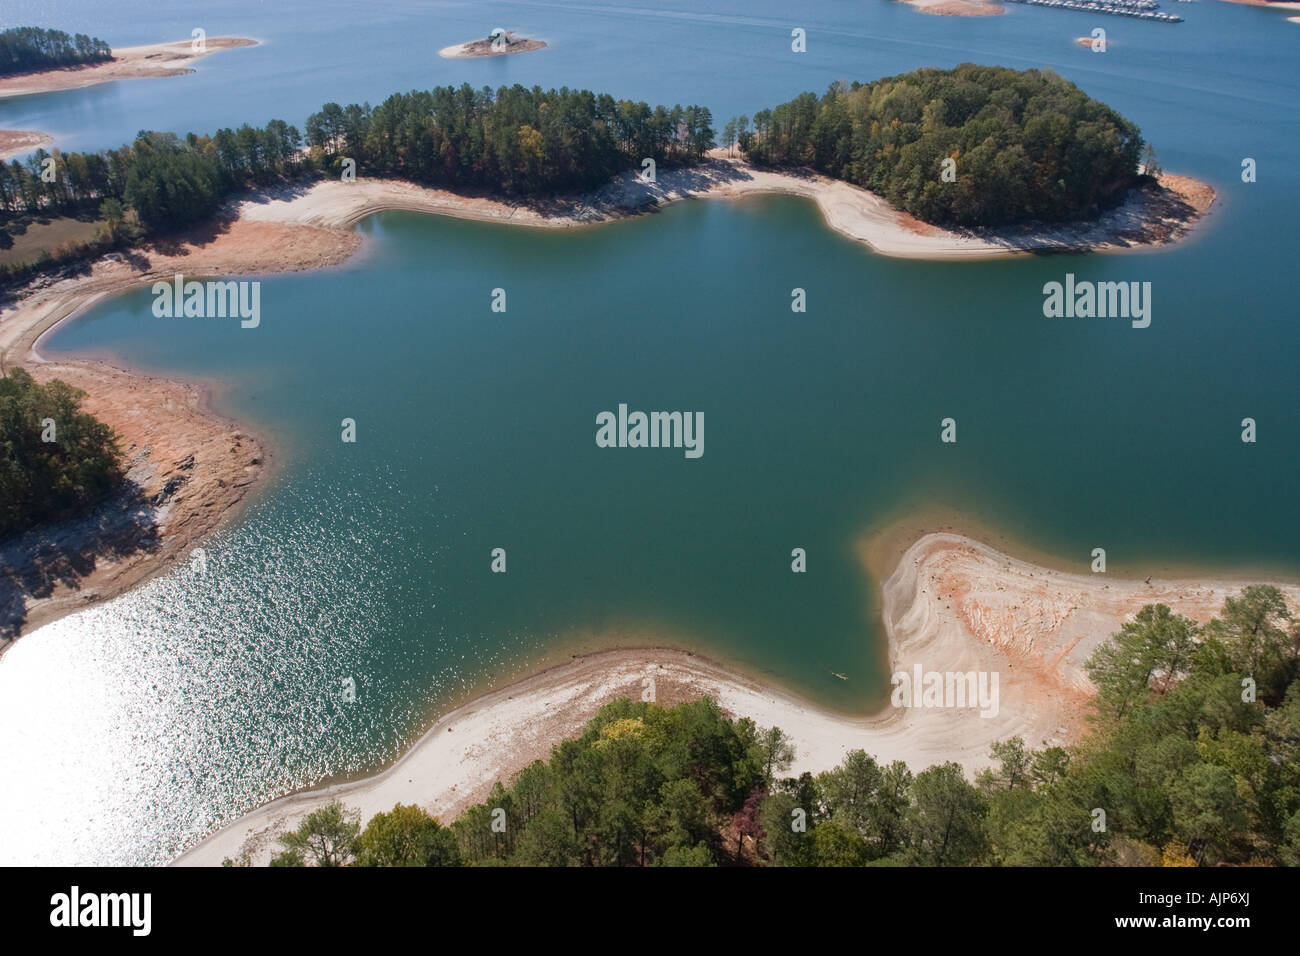 Lake Lanier at low levels in drought stricken Georgia, USA.  Lake Lanier serves water to much of north Georgia and Atlanta. Stock Photo